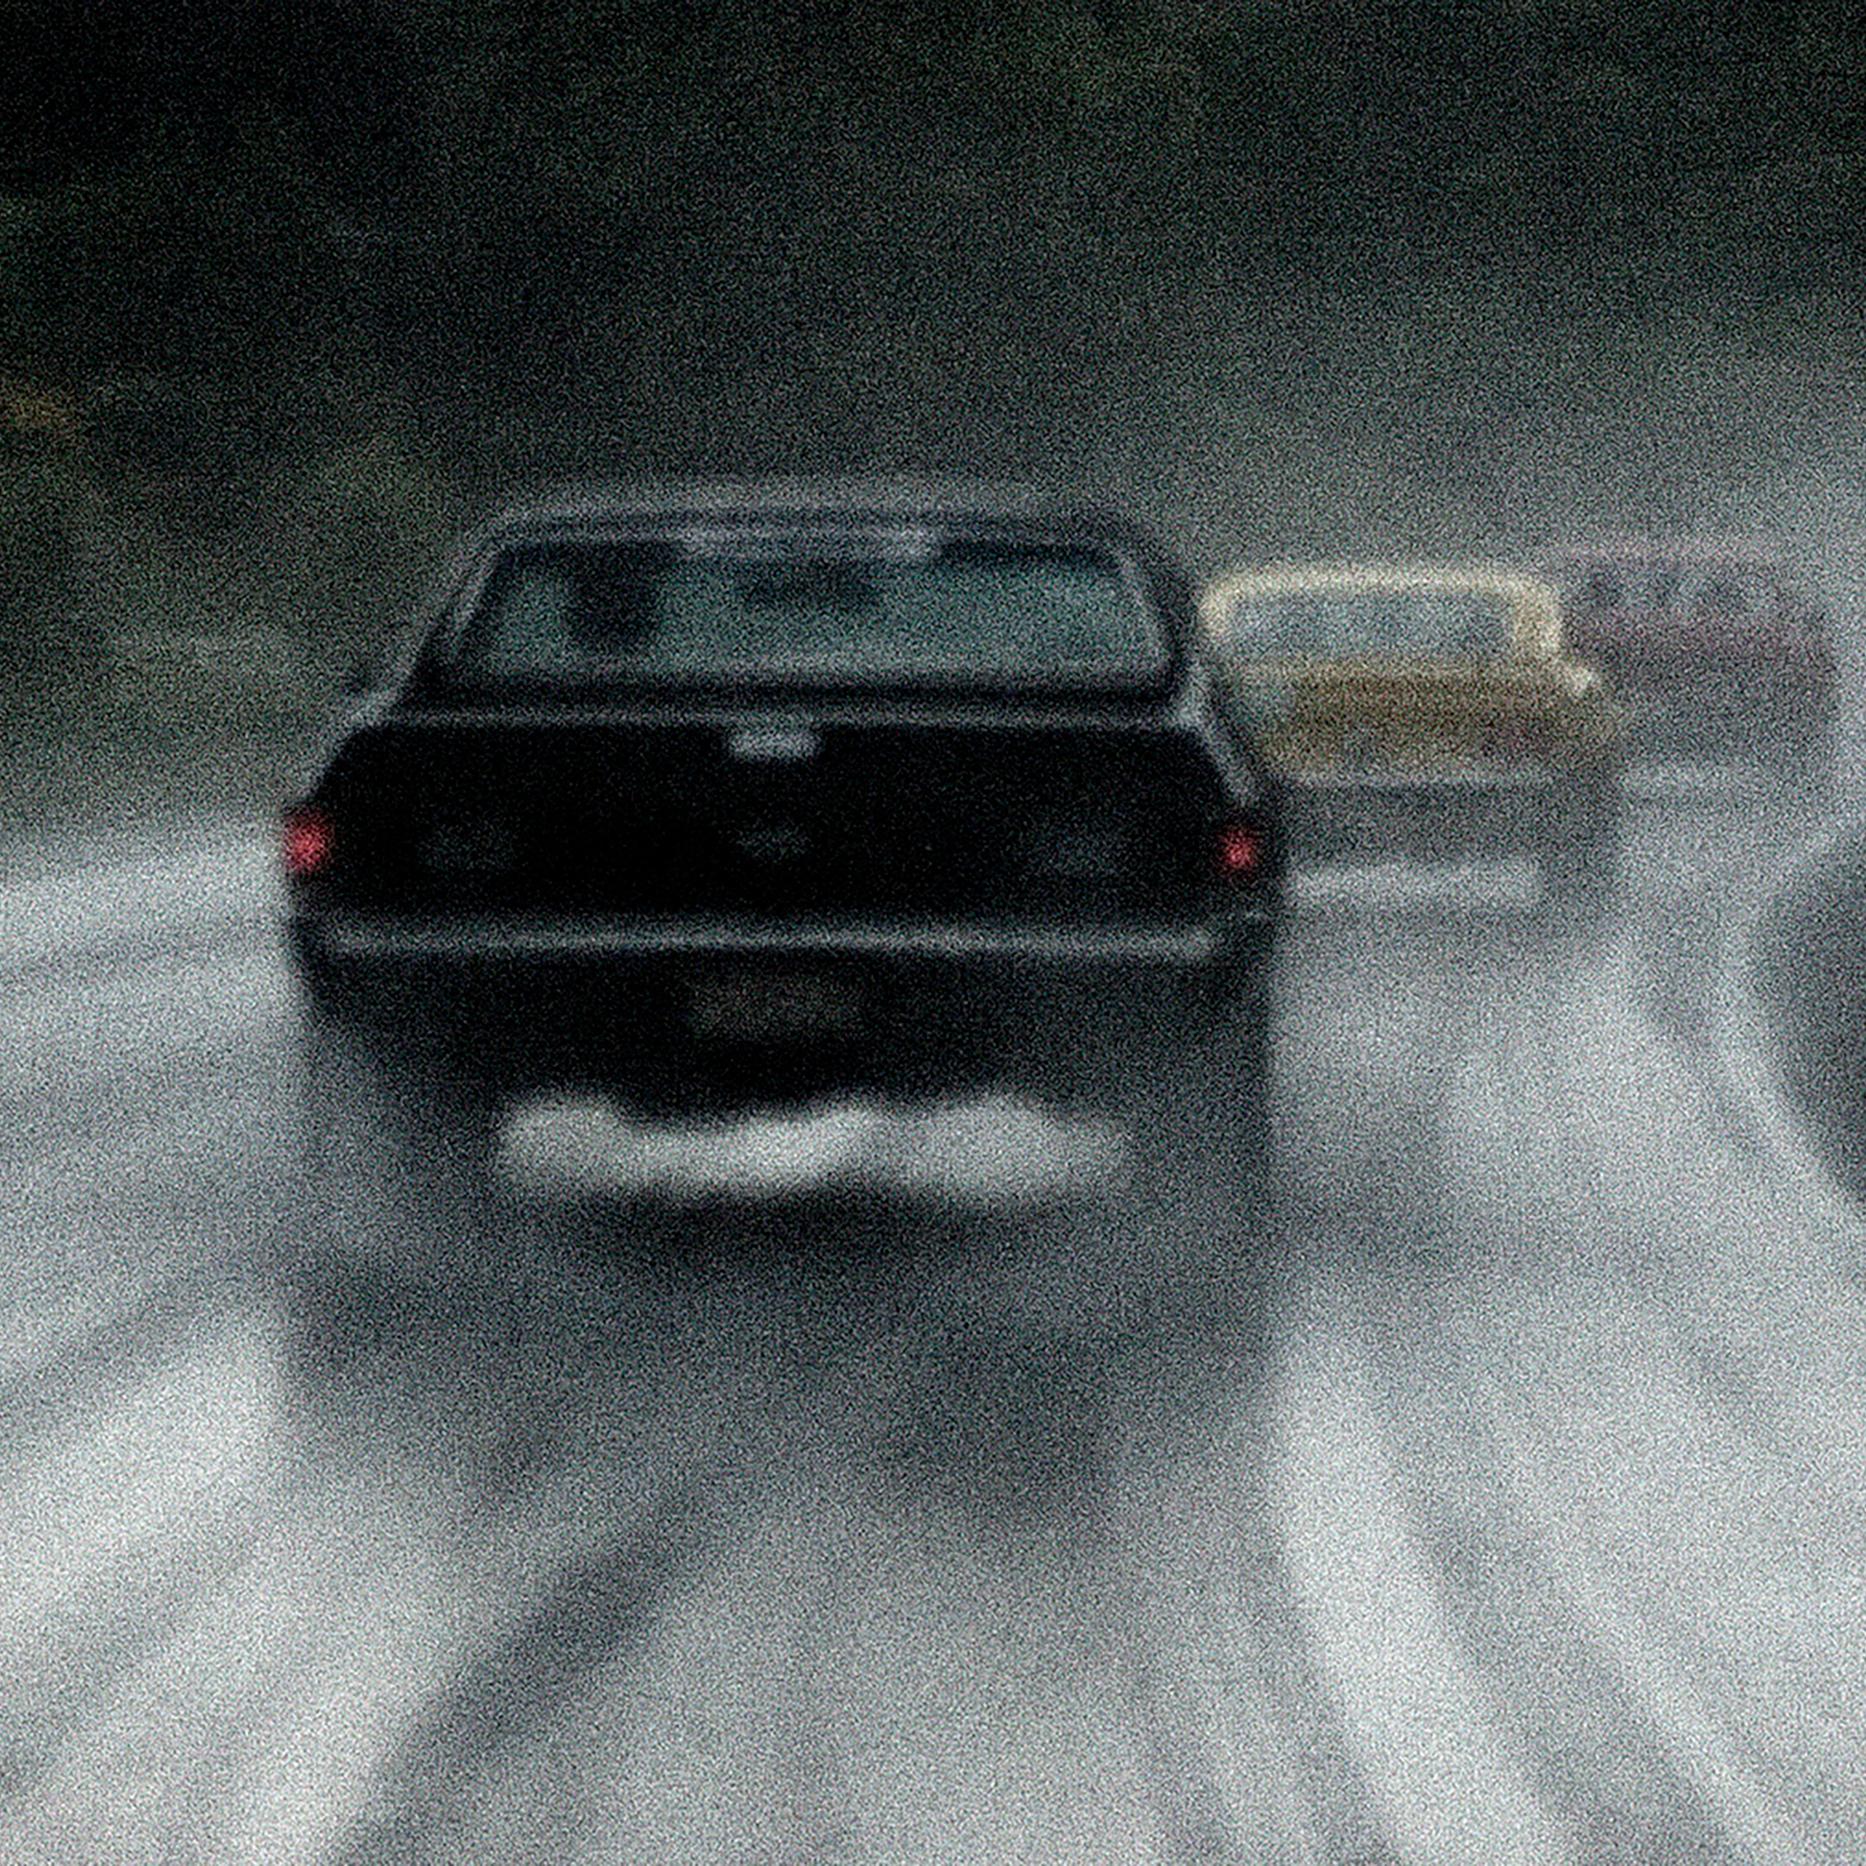 Heavy rain -Signed limited edition archival pigment print, Contemporary, USA - Black Color Photograph by Geoff Halpin